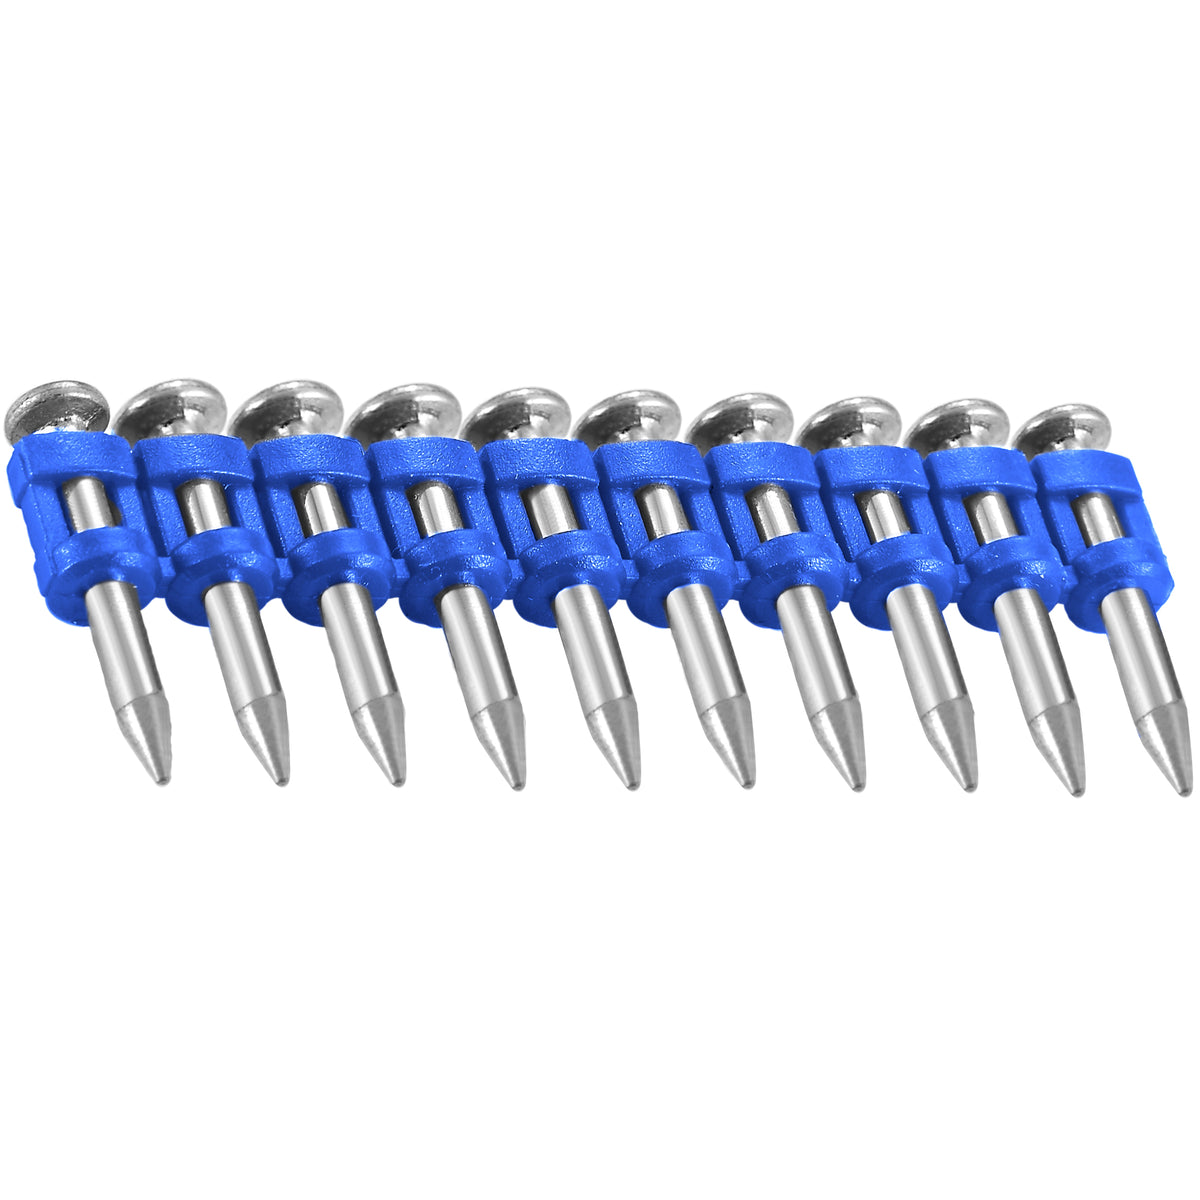 Galvanized Smooth Shank Concrete and Steel Nails 7/8"-1 1/2" - MEITE USA